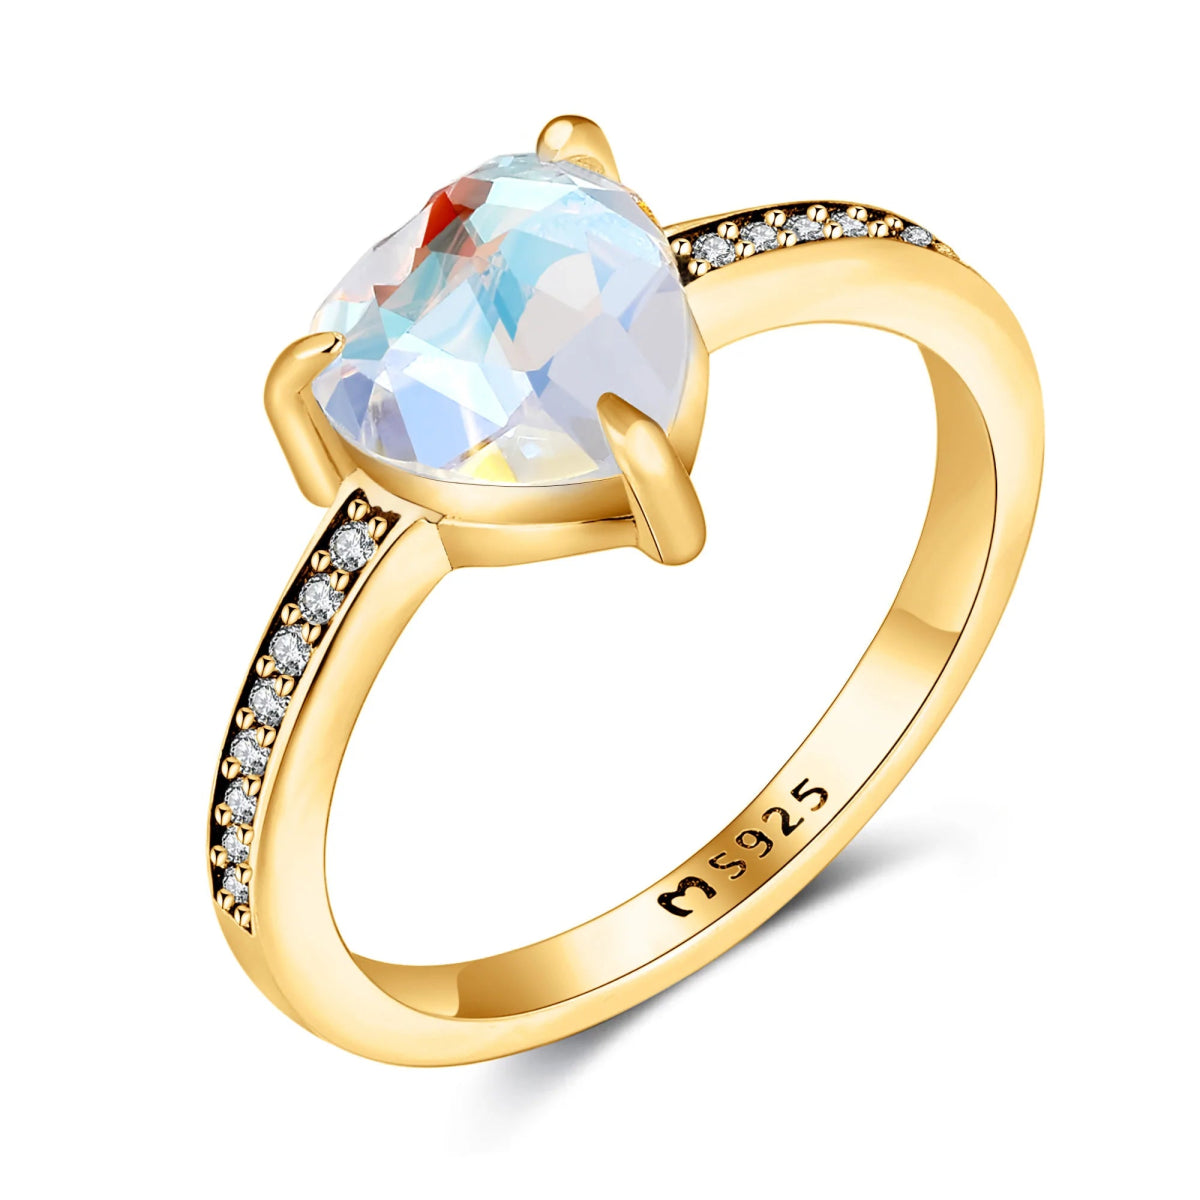 "Crystalline Passion" Ring - Milas Jewels Shop